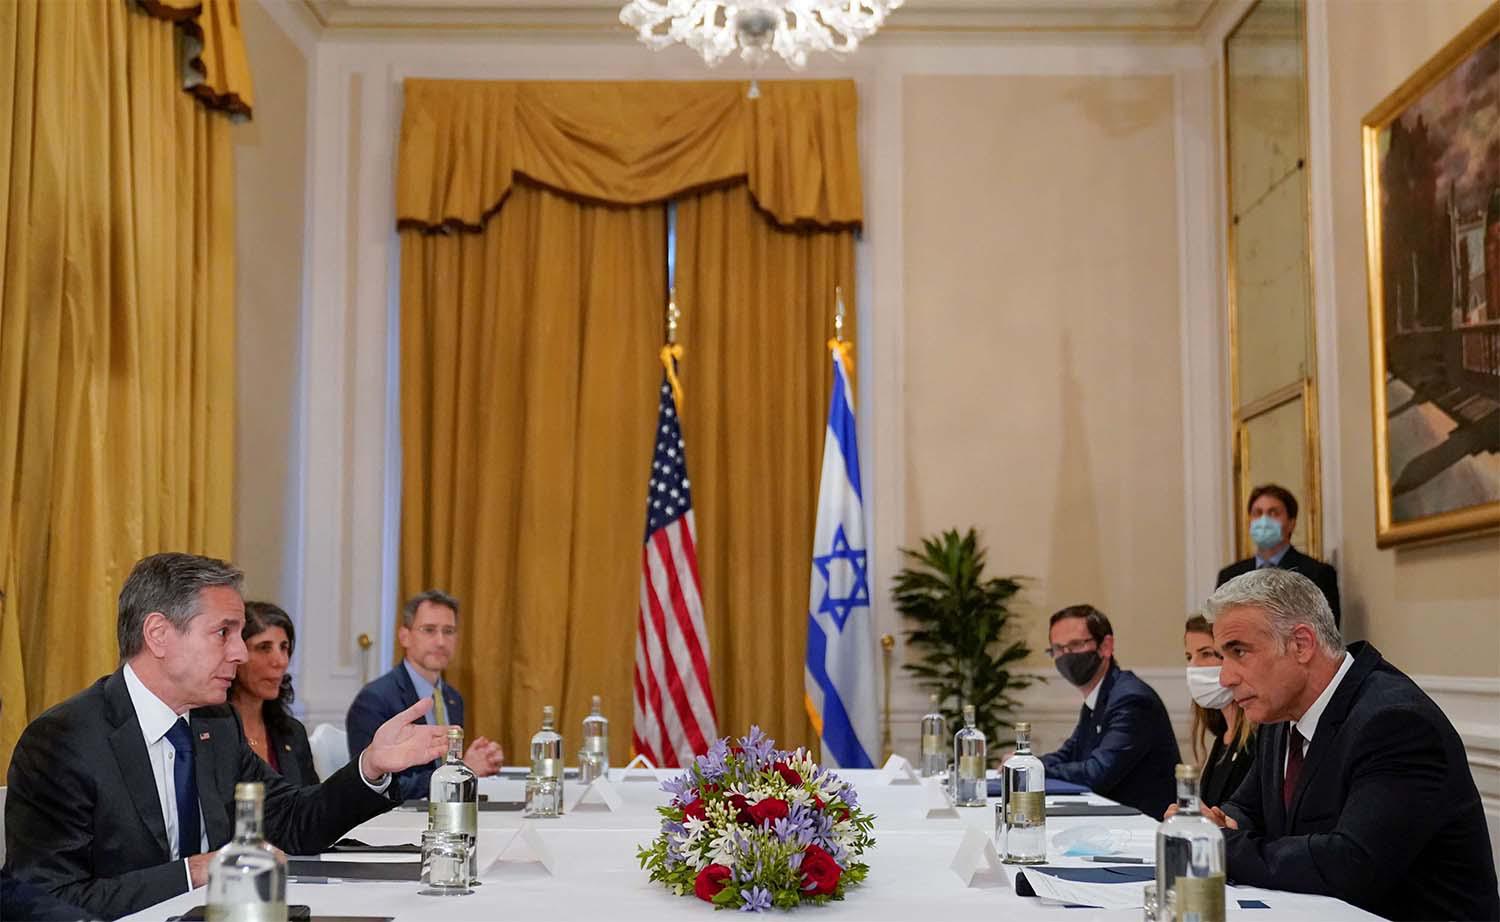 Lapid says Israel will make its objections on Iran nuclear deal privately